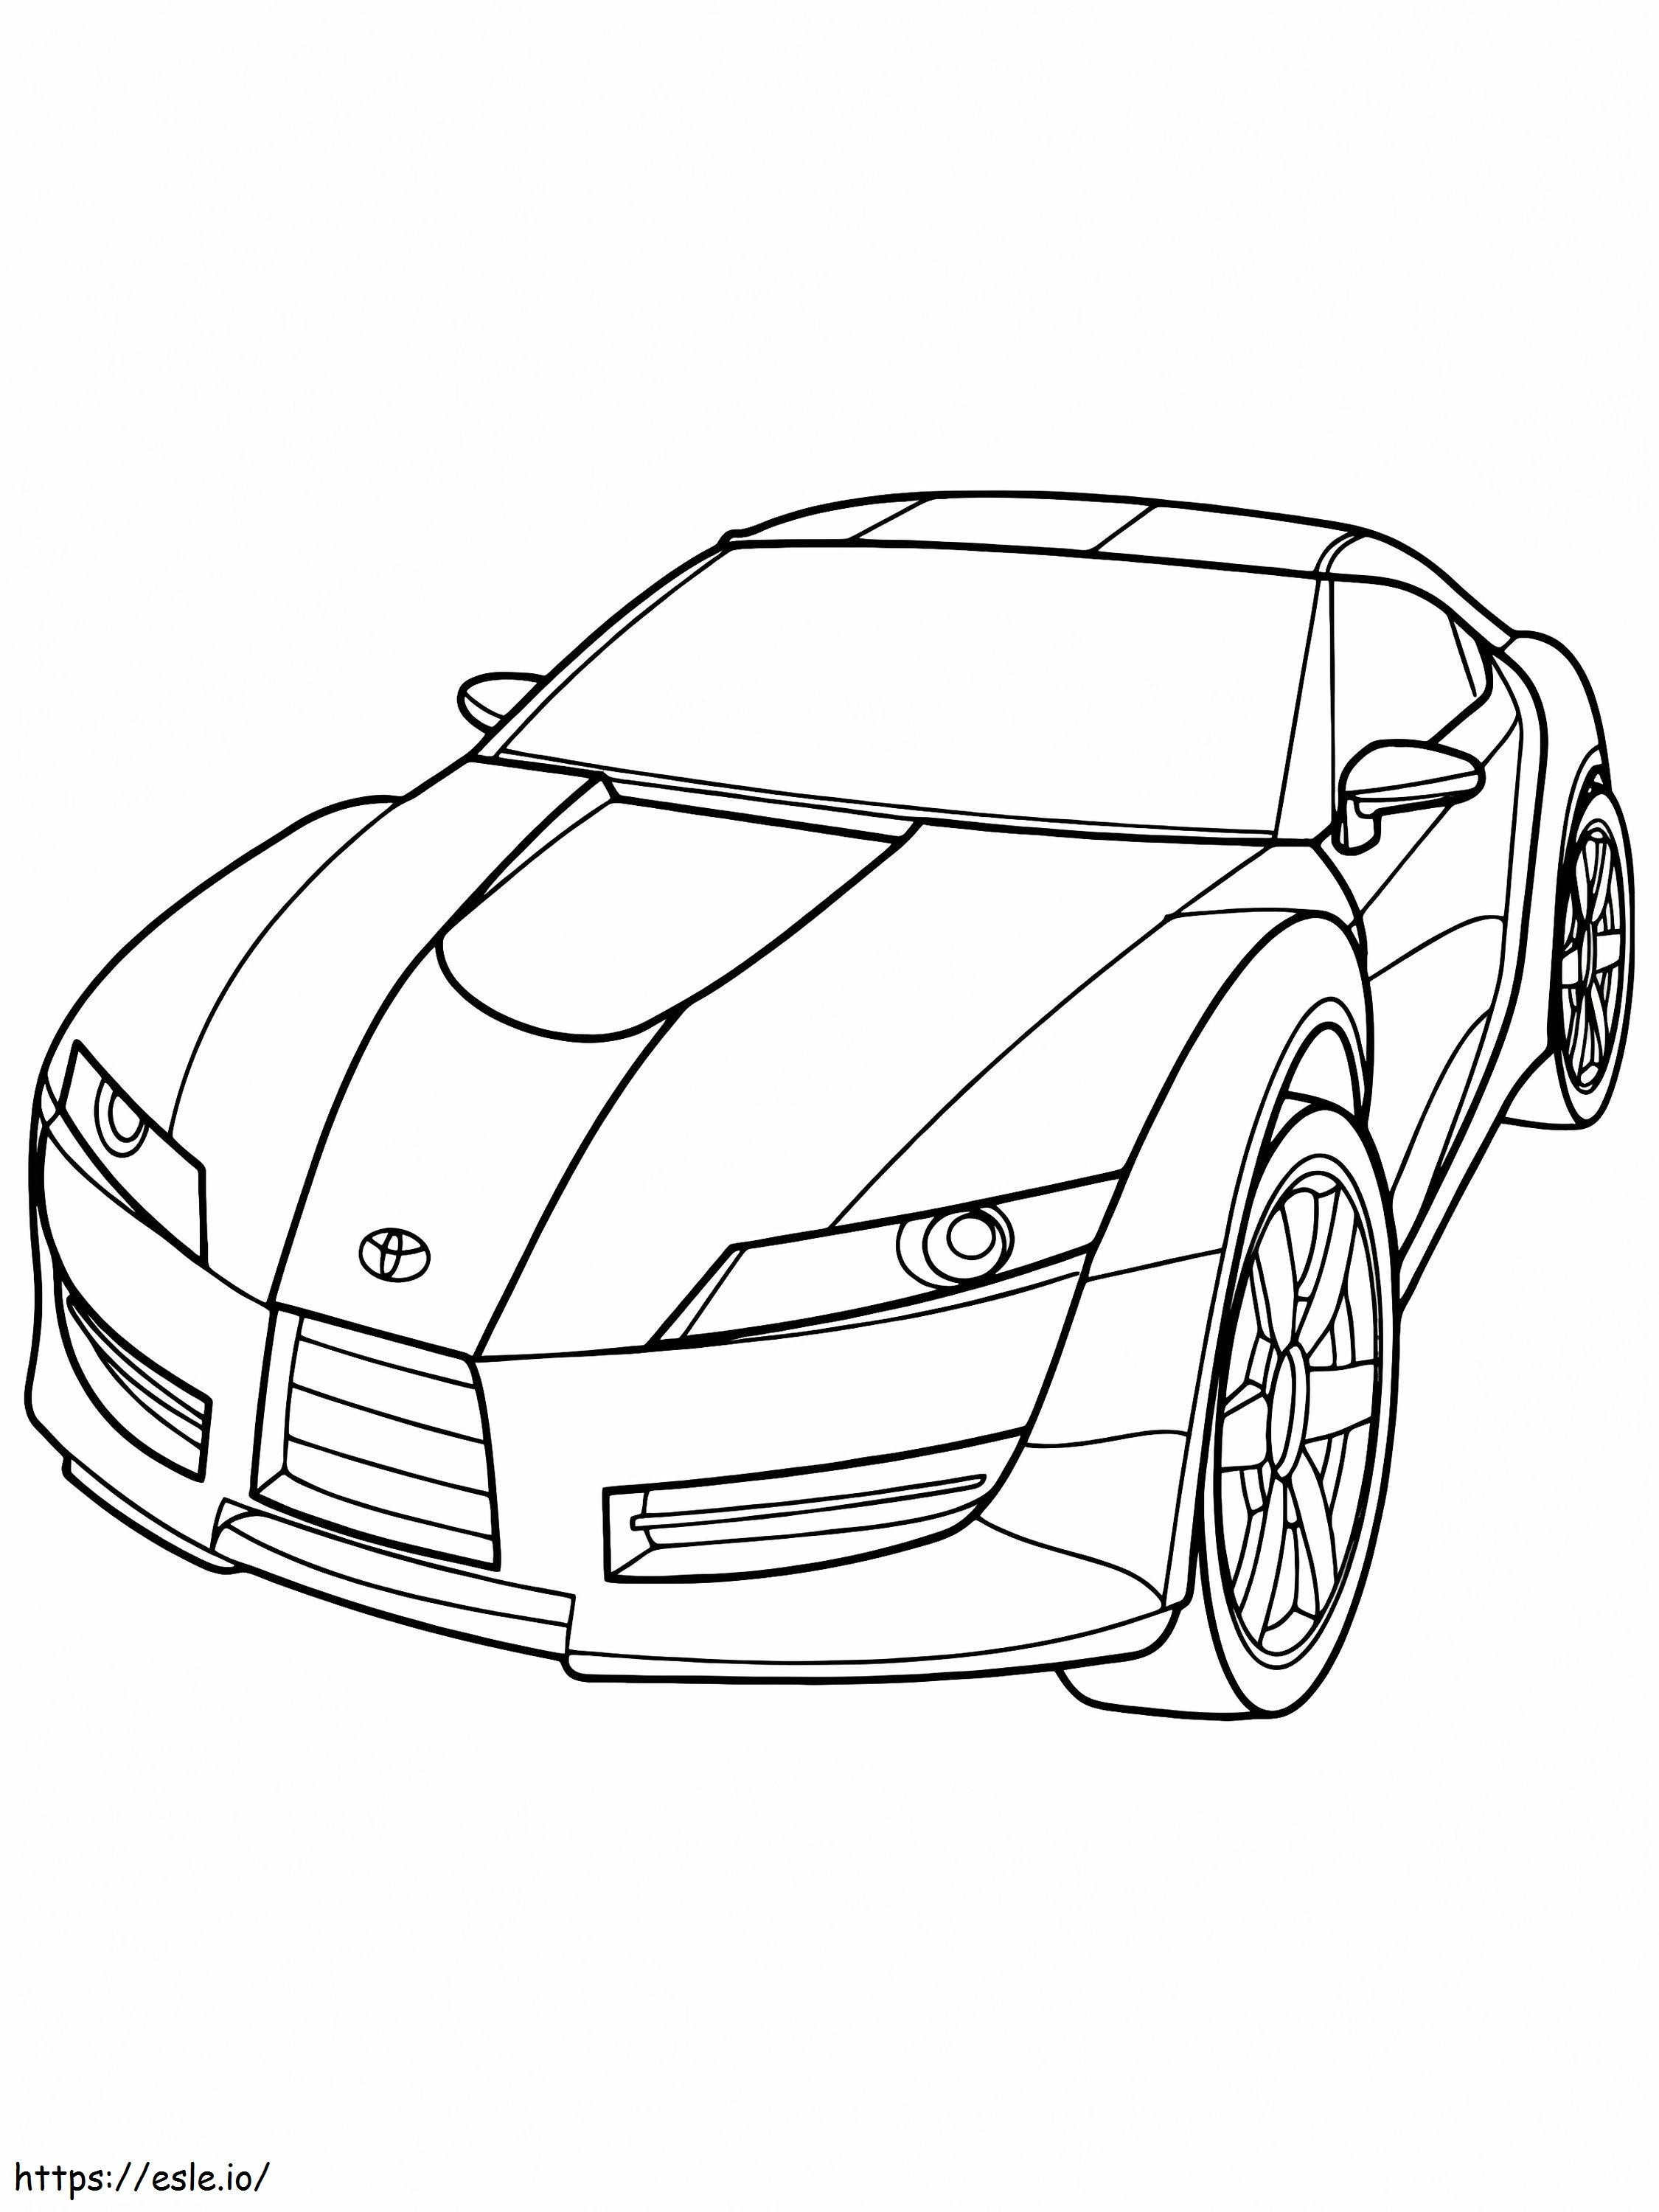 Great Car Design coloring page